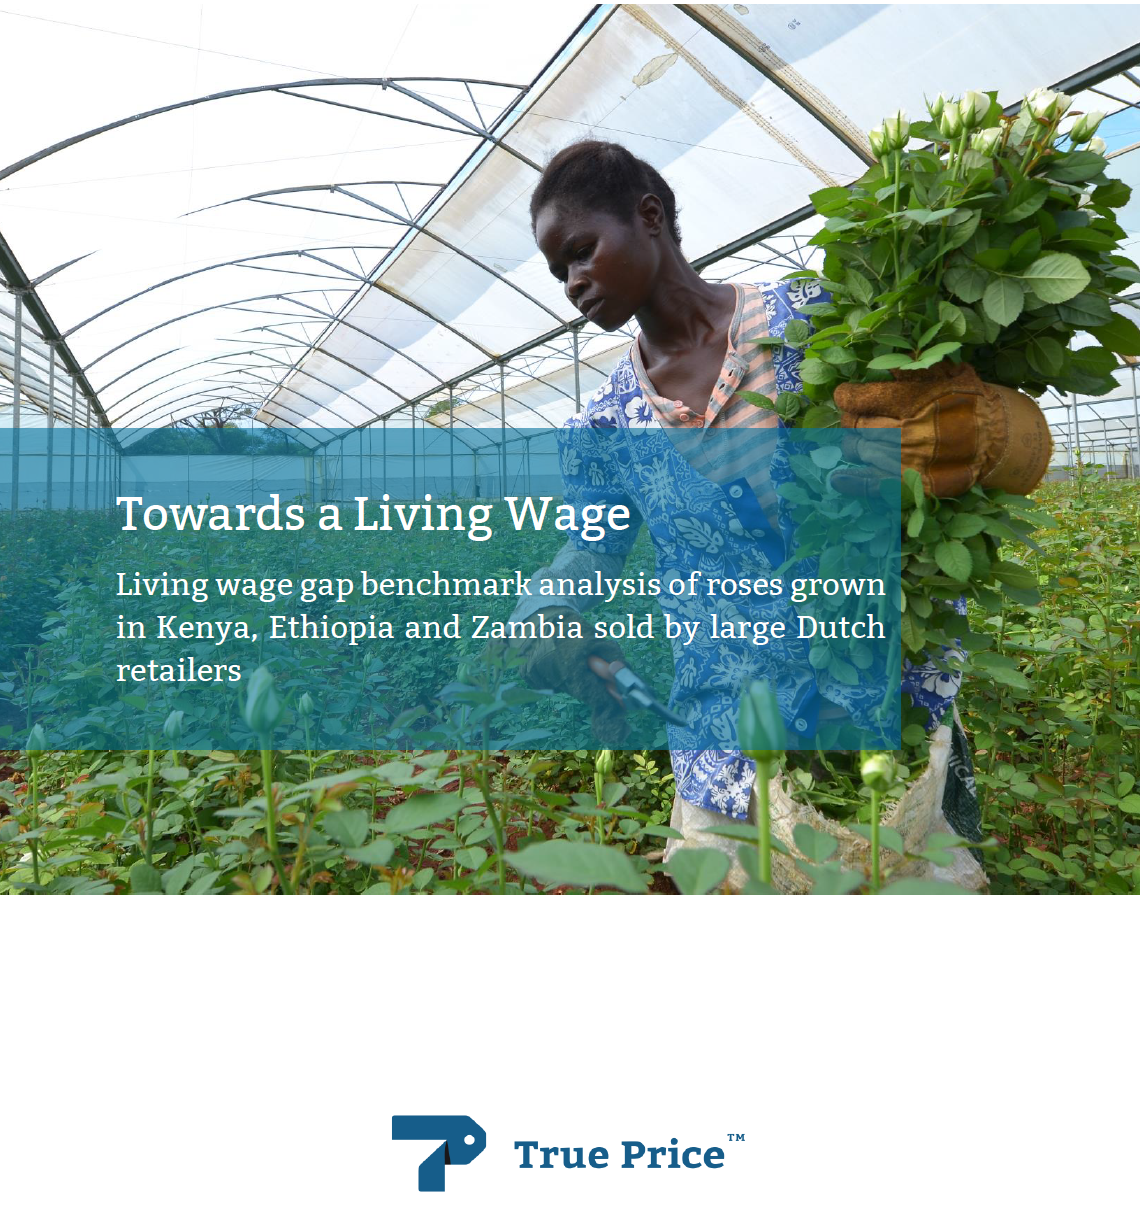 Towards a living wage – Gap benchmark analysis of roses grown in Kenya, Ethiopia and Zambia